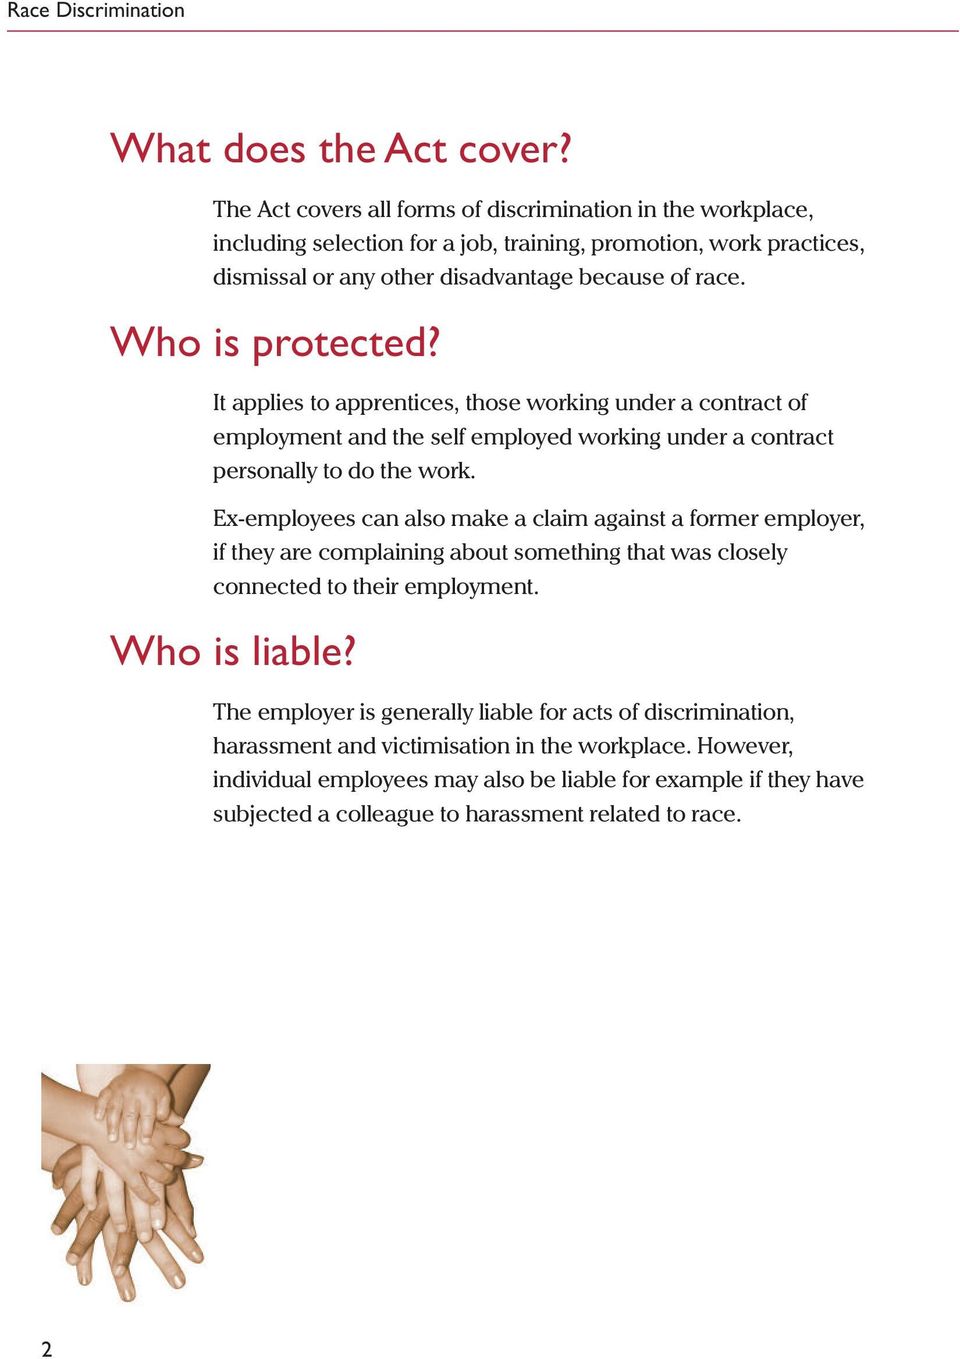 Who is protected? It applies to apprentices, those working under a contract of employment and the self employed working under a contract personally to do the work.